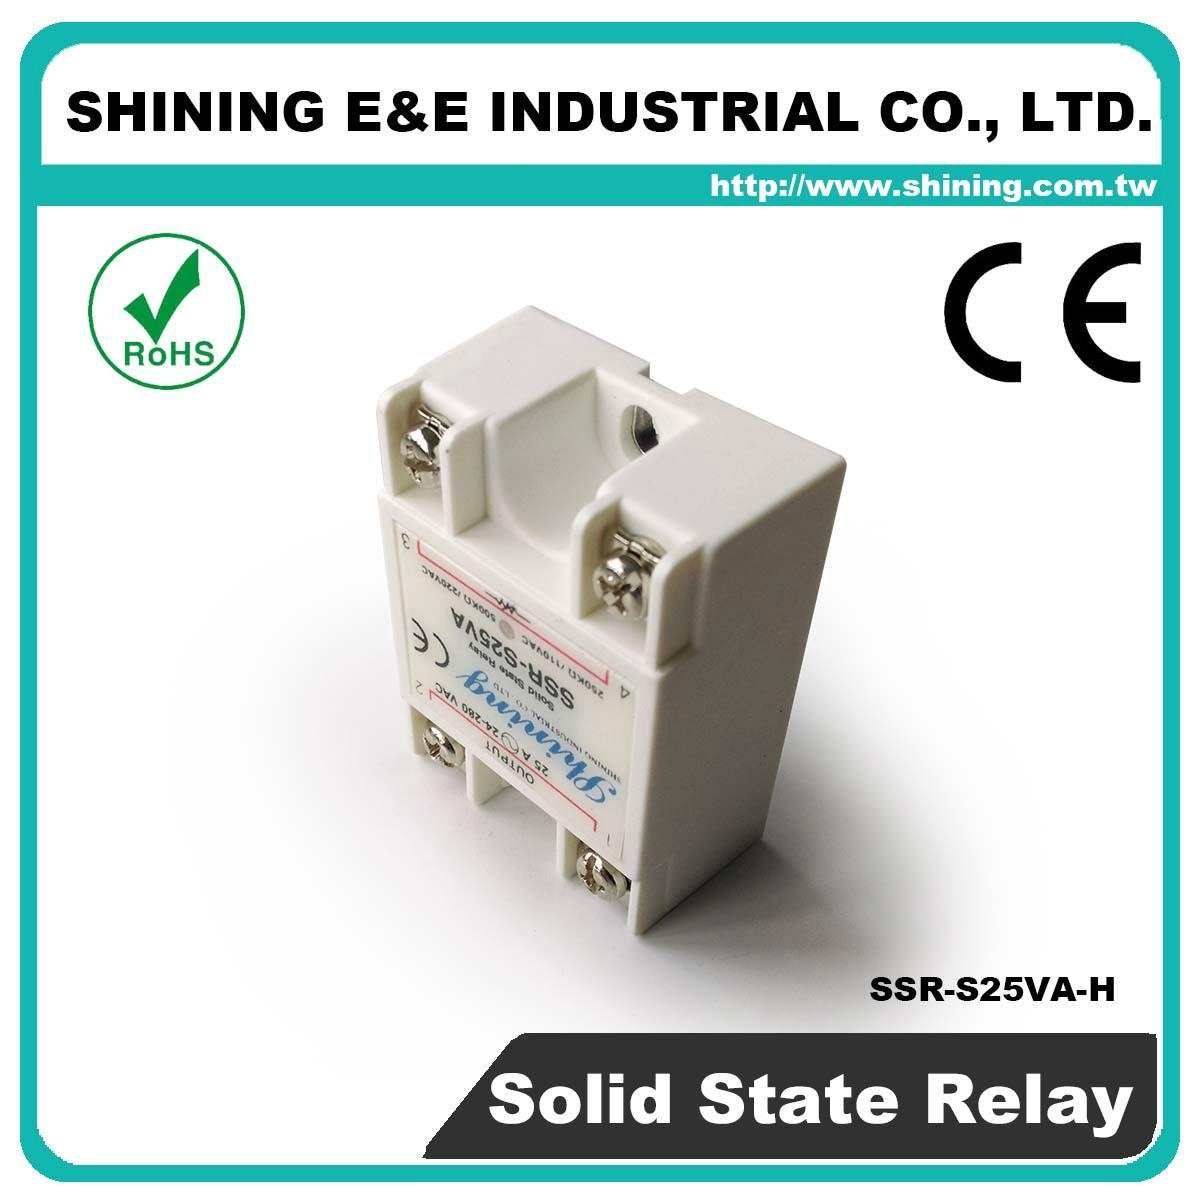 SSR-S25VA-H VR to AC Phase Control Adjustable Solid State Relays 4